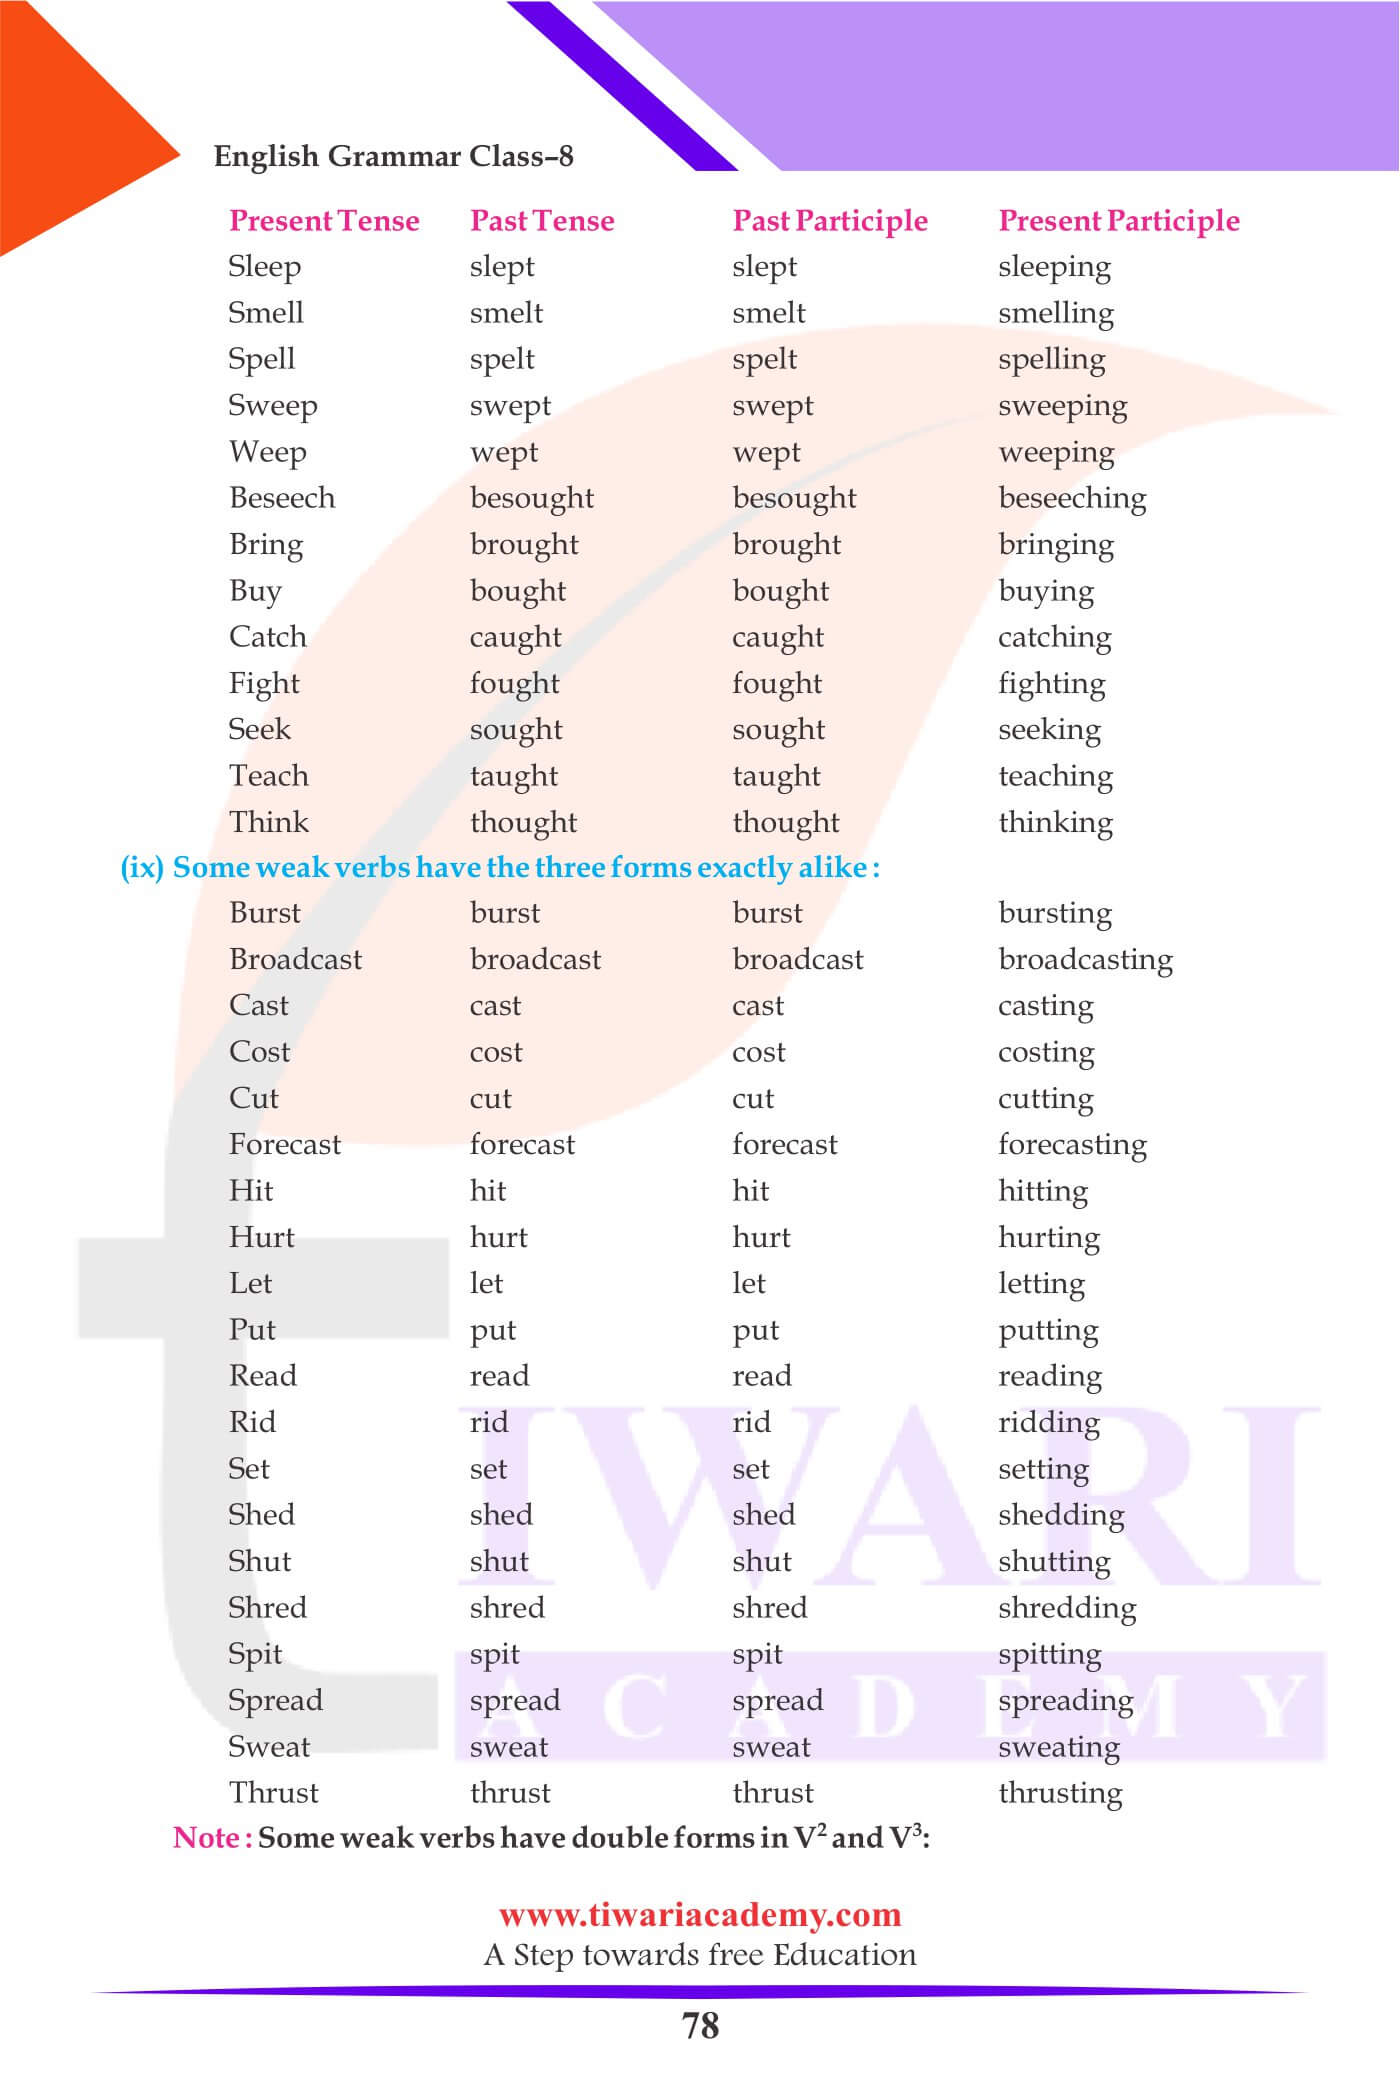 Class 8 English Grammar Chapter 6 The Verb for Session 2023-24.